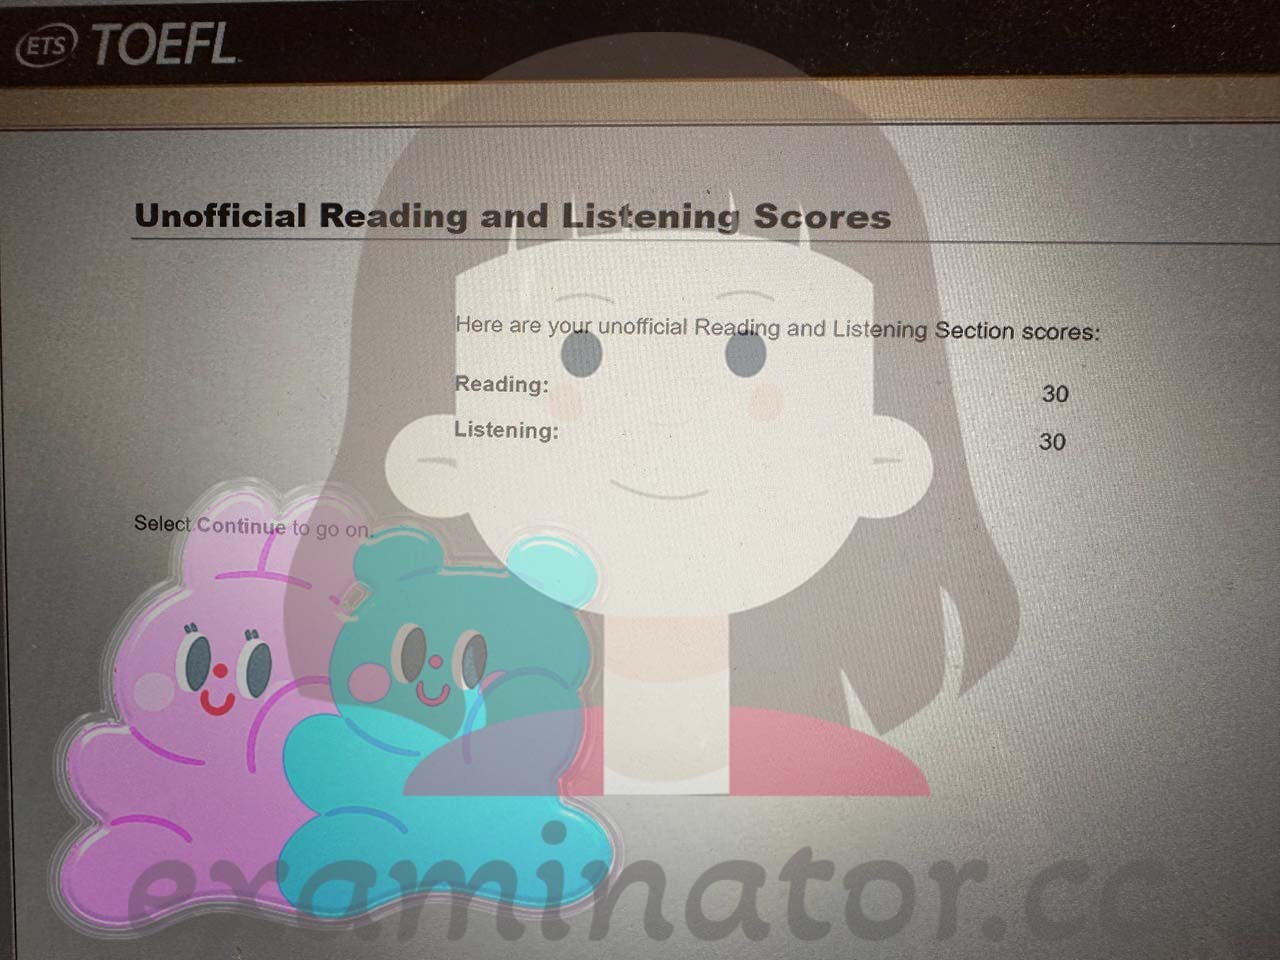 🇨🇳 From Beijing to Beyond: TOEFL Victory as Our Client Scores Full Marks in Reading and Listening with Our TOEFL Cheating Expert Help!🎉 100+ Overall Goal in Sight! 🌈 Secret Weapon for Scoring 25+ on the Speaking Section! 👄